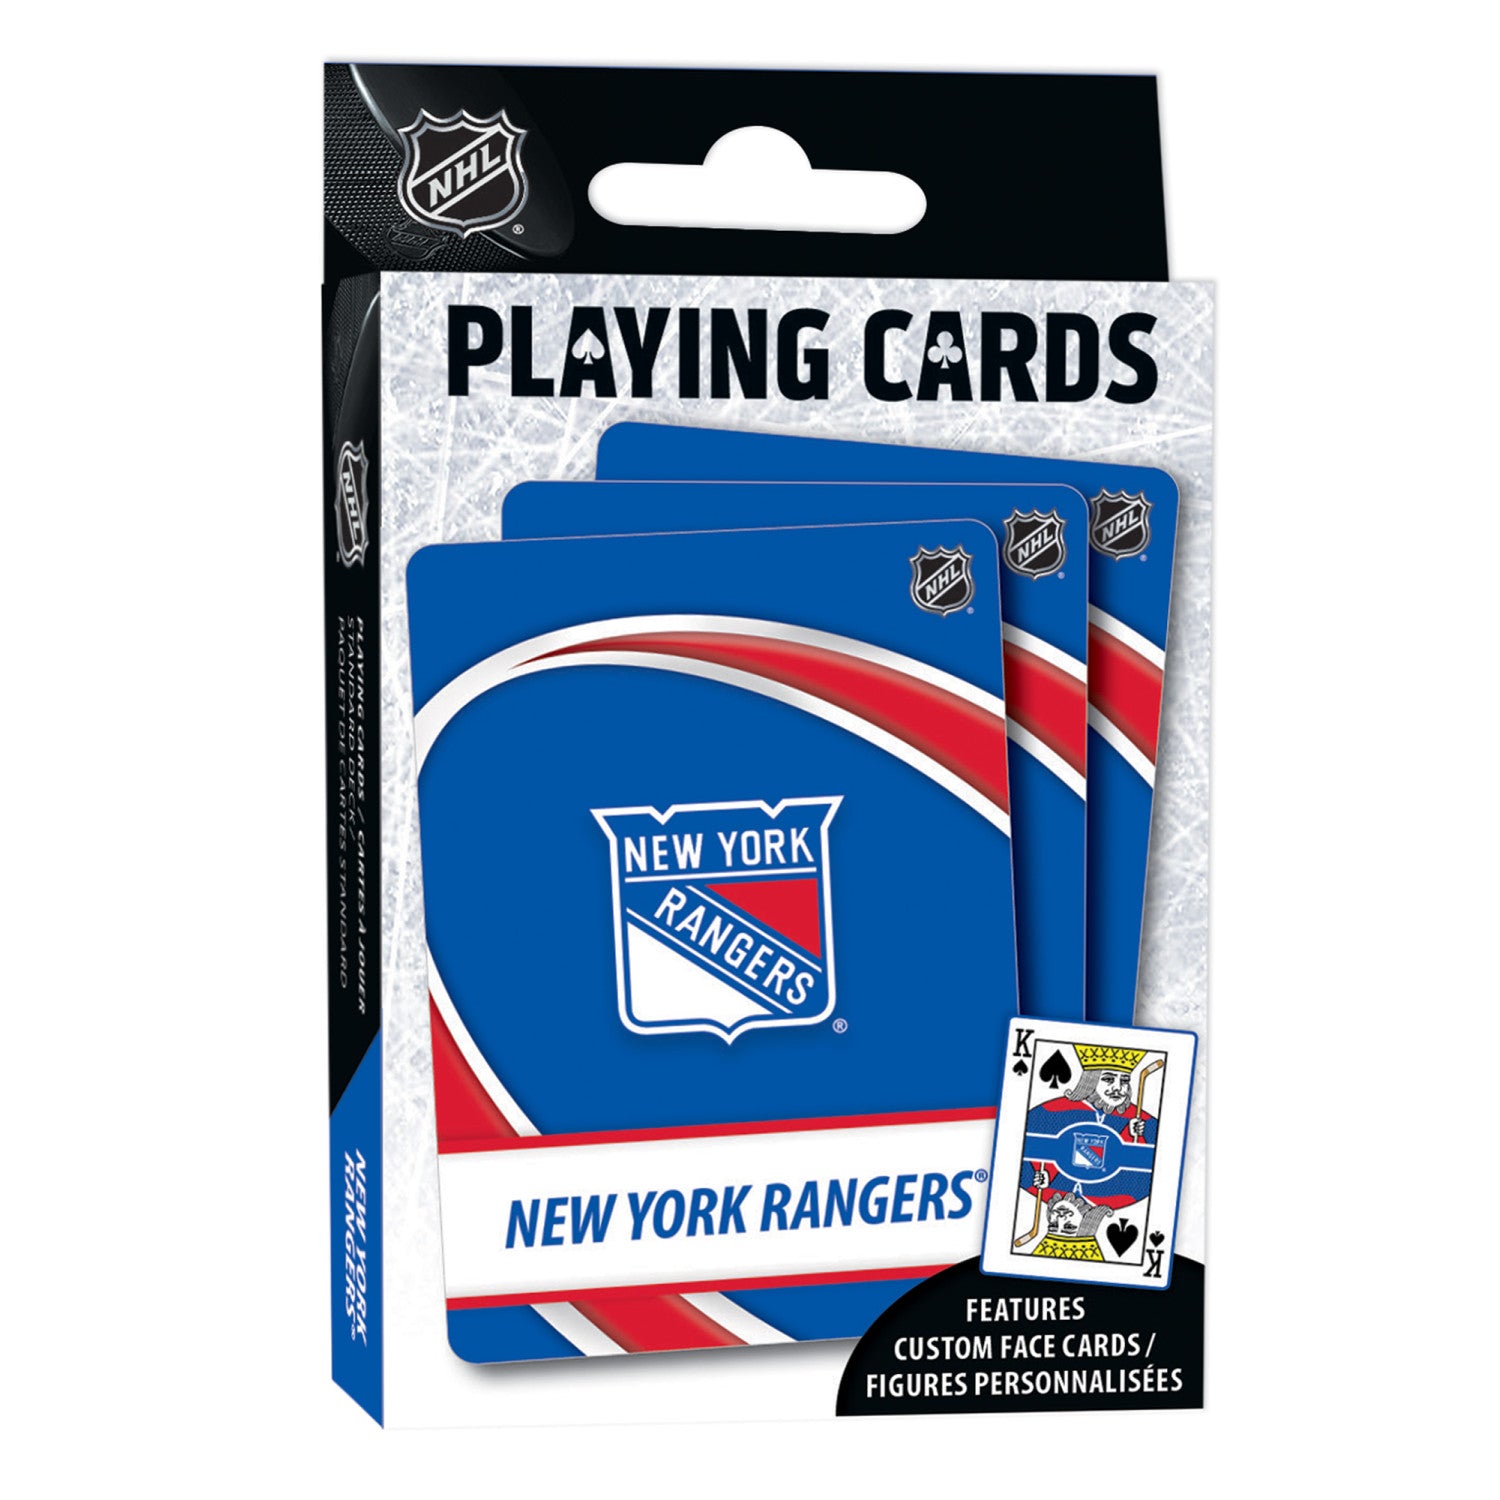 New York Rangers Playing Cards - 54 Card Deck